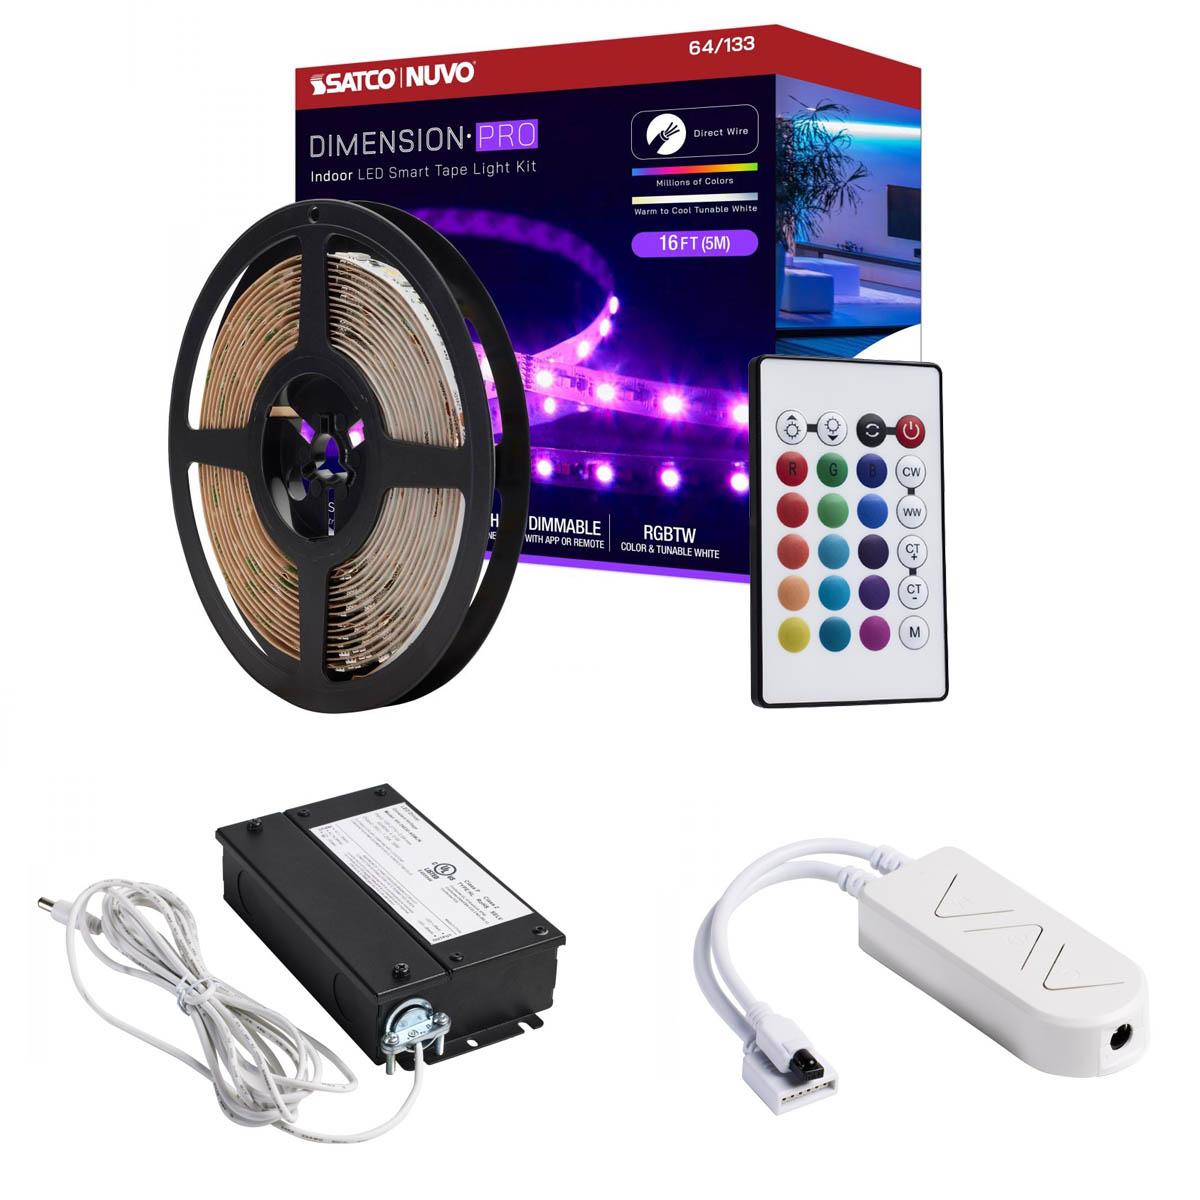 Dimension Pro LED Smart Tape Light Kit with Remote, 16ft Reel, Color Changing RGB and Tunable White, 24V, J-Box Connection